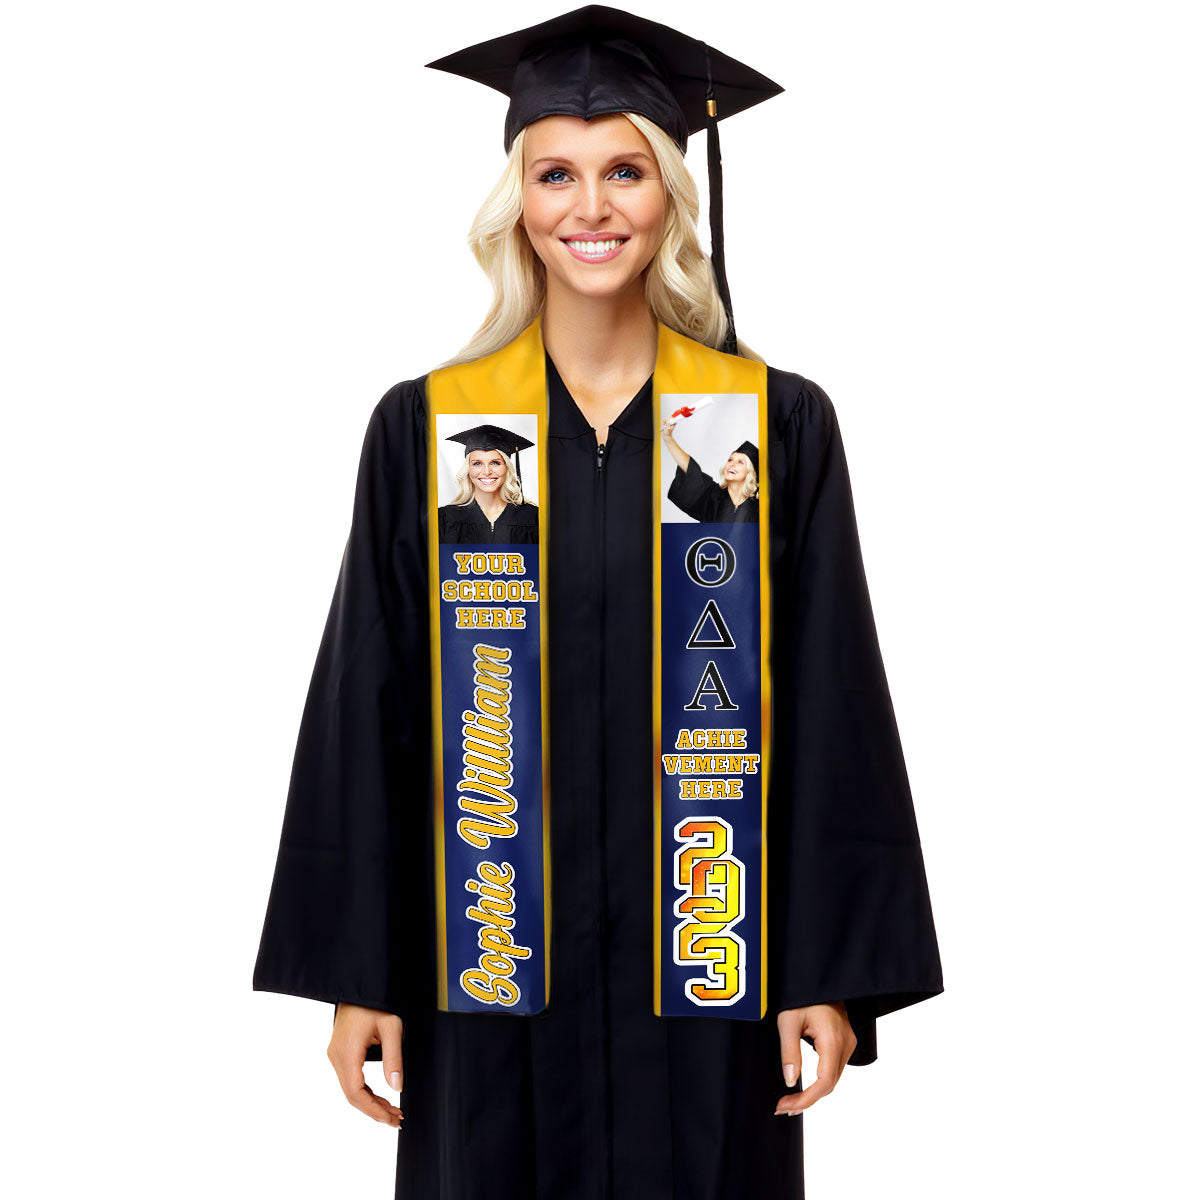 of 2023 Fraternity Graduation Stole Upload Image - Personalize Pawfect House